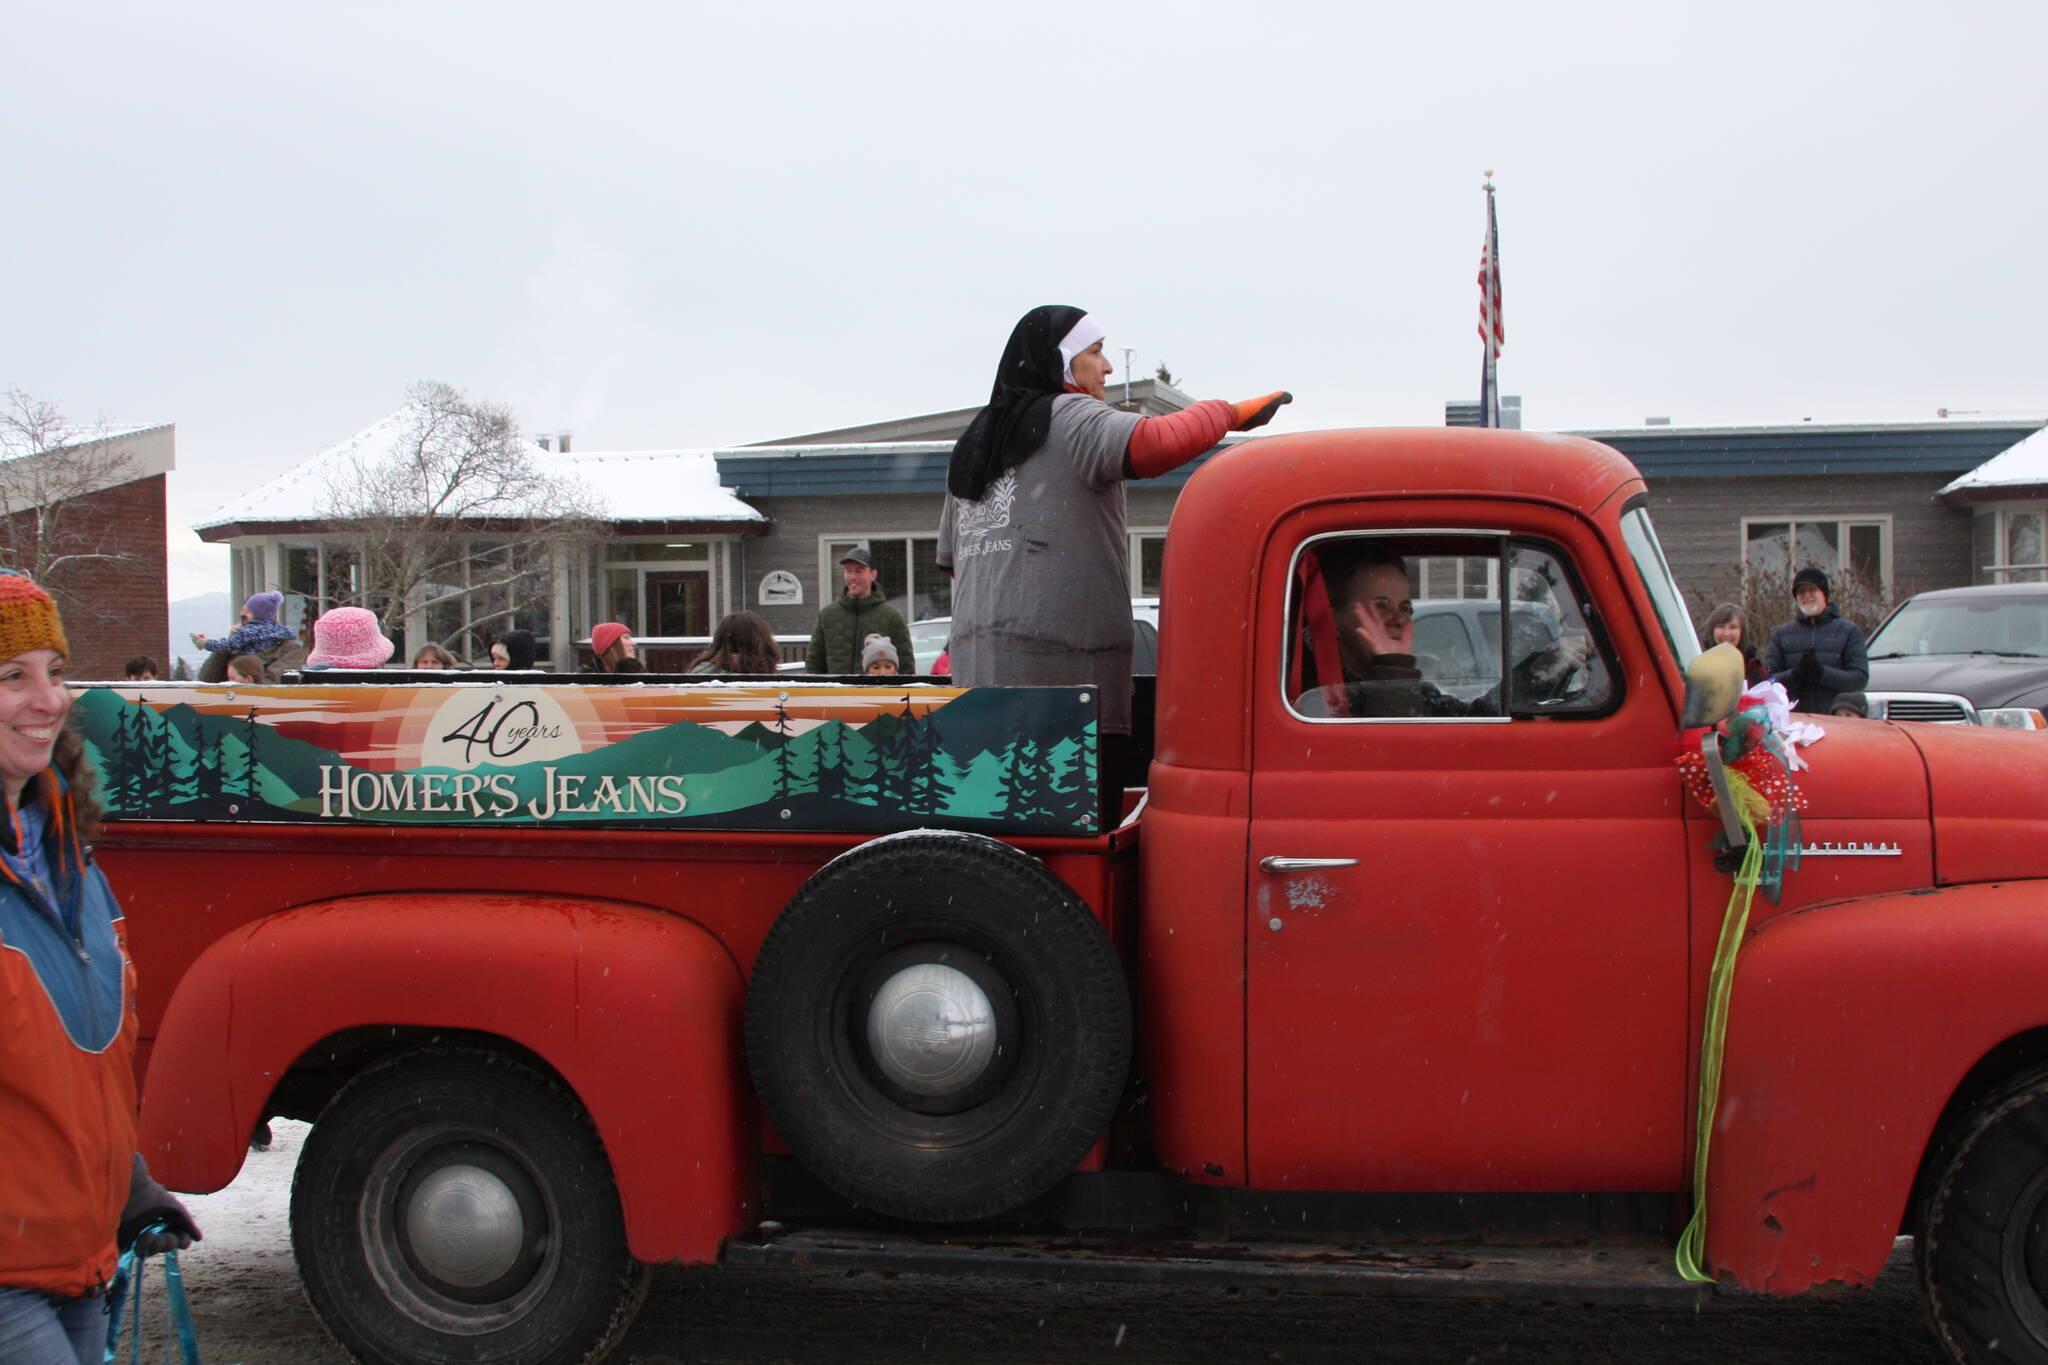 Homer’s Jeans employees, celebrating 40 years of business, drive down Pioneer Avenue in the 69th annual Winter Carnival Parade on Saturday, Feb. 11, 2023 in Homer, Alaska. Photo by Delcenia Cosman